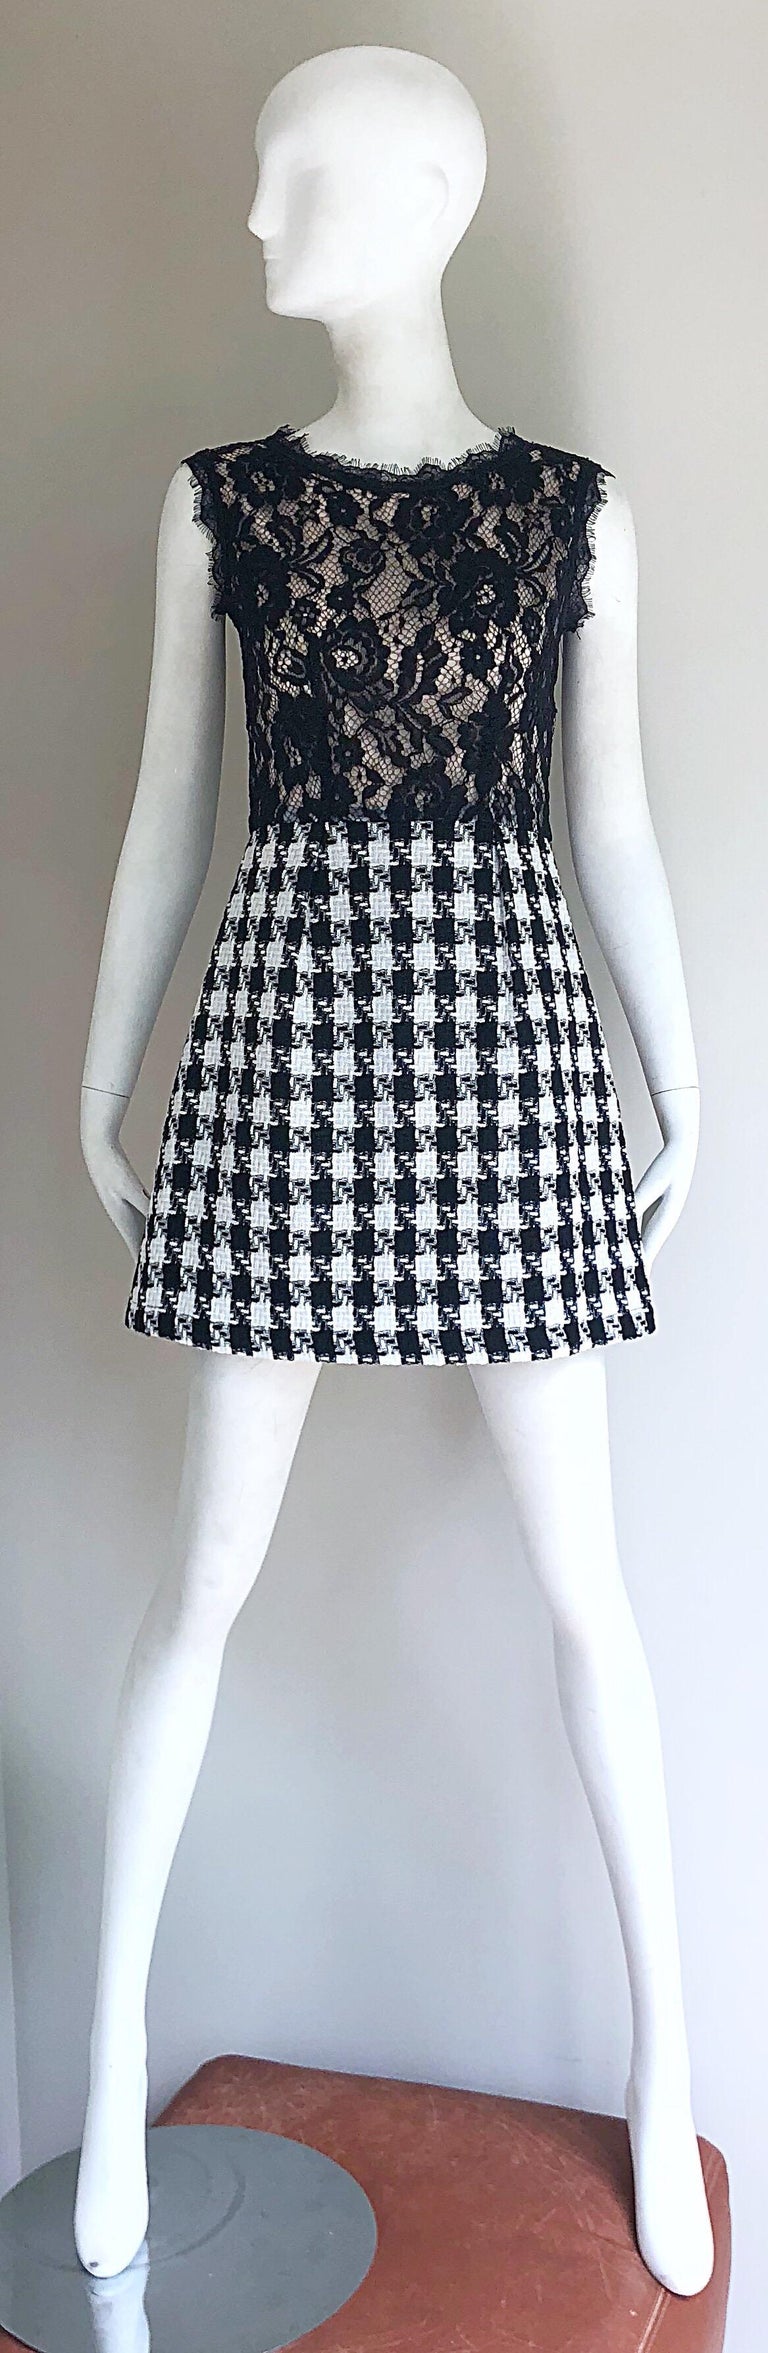 Marc Jacobs Early 2000s Black and White Lace Houndstooth Checkered Mini Dress For Sale 9